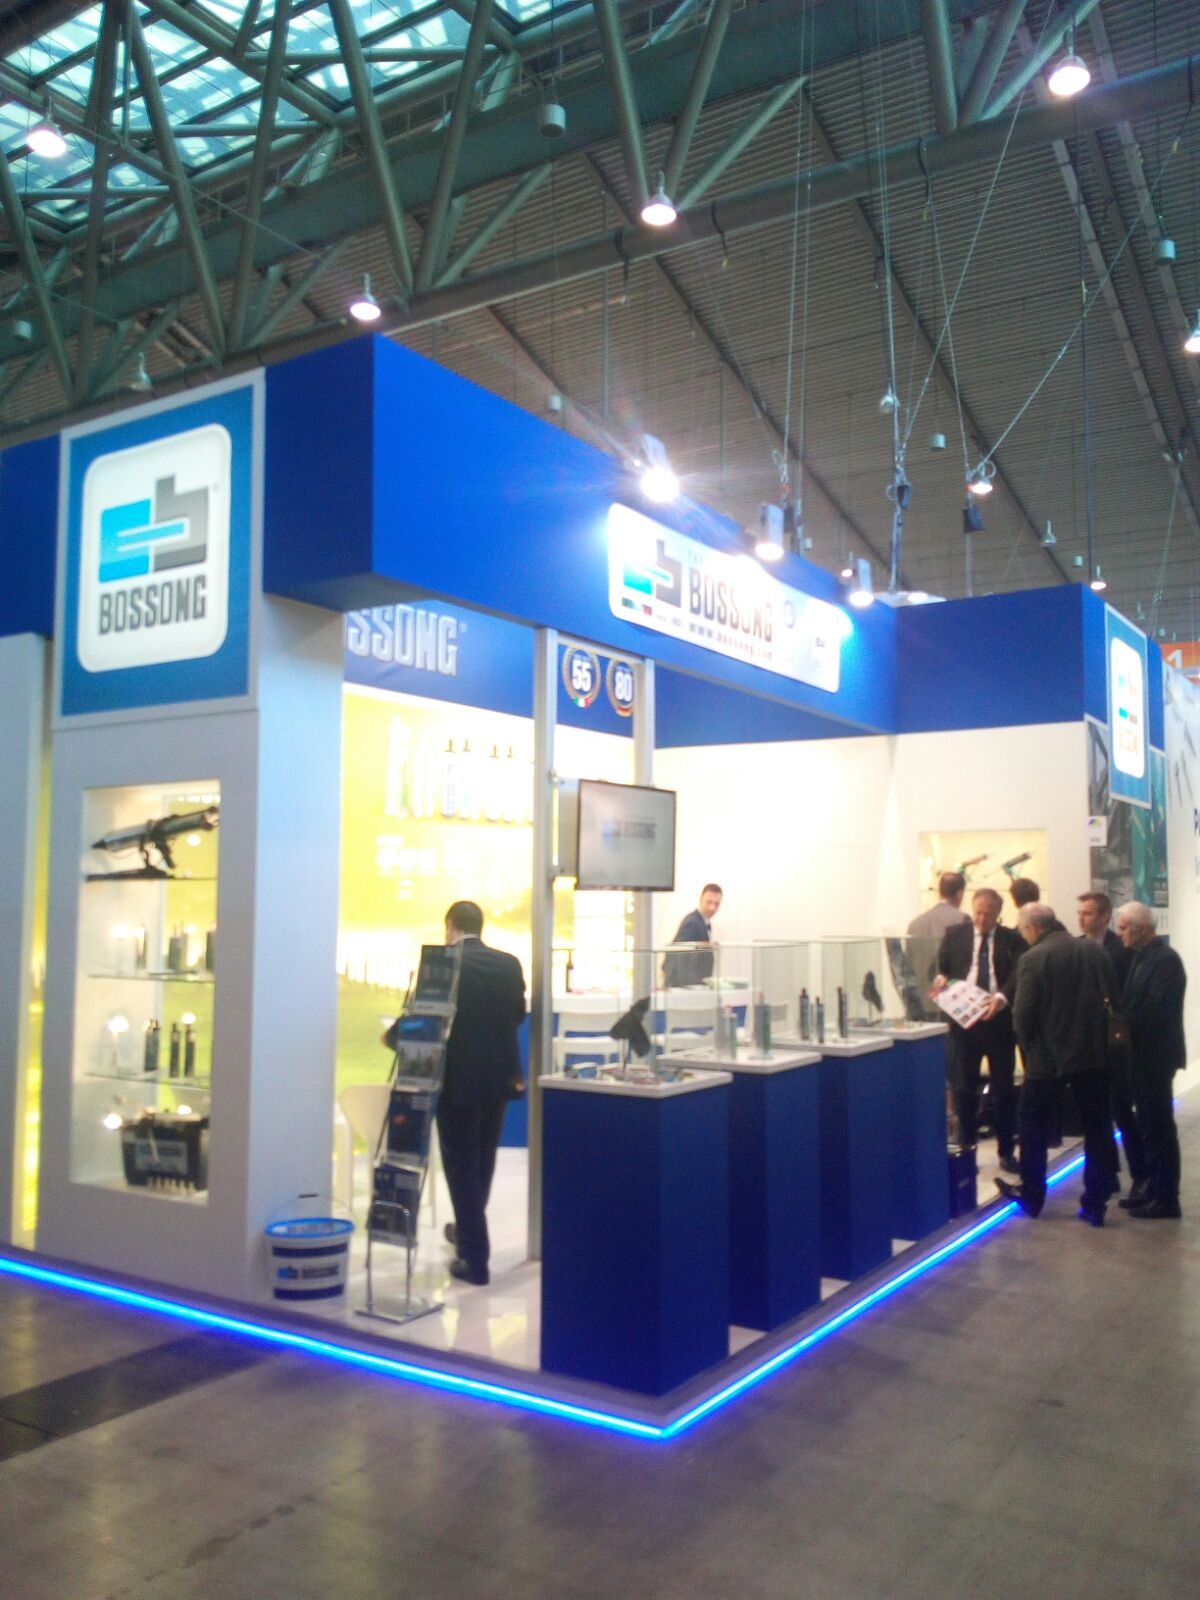 nd BOSSONG | fastener fair Stoccarda